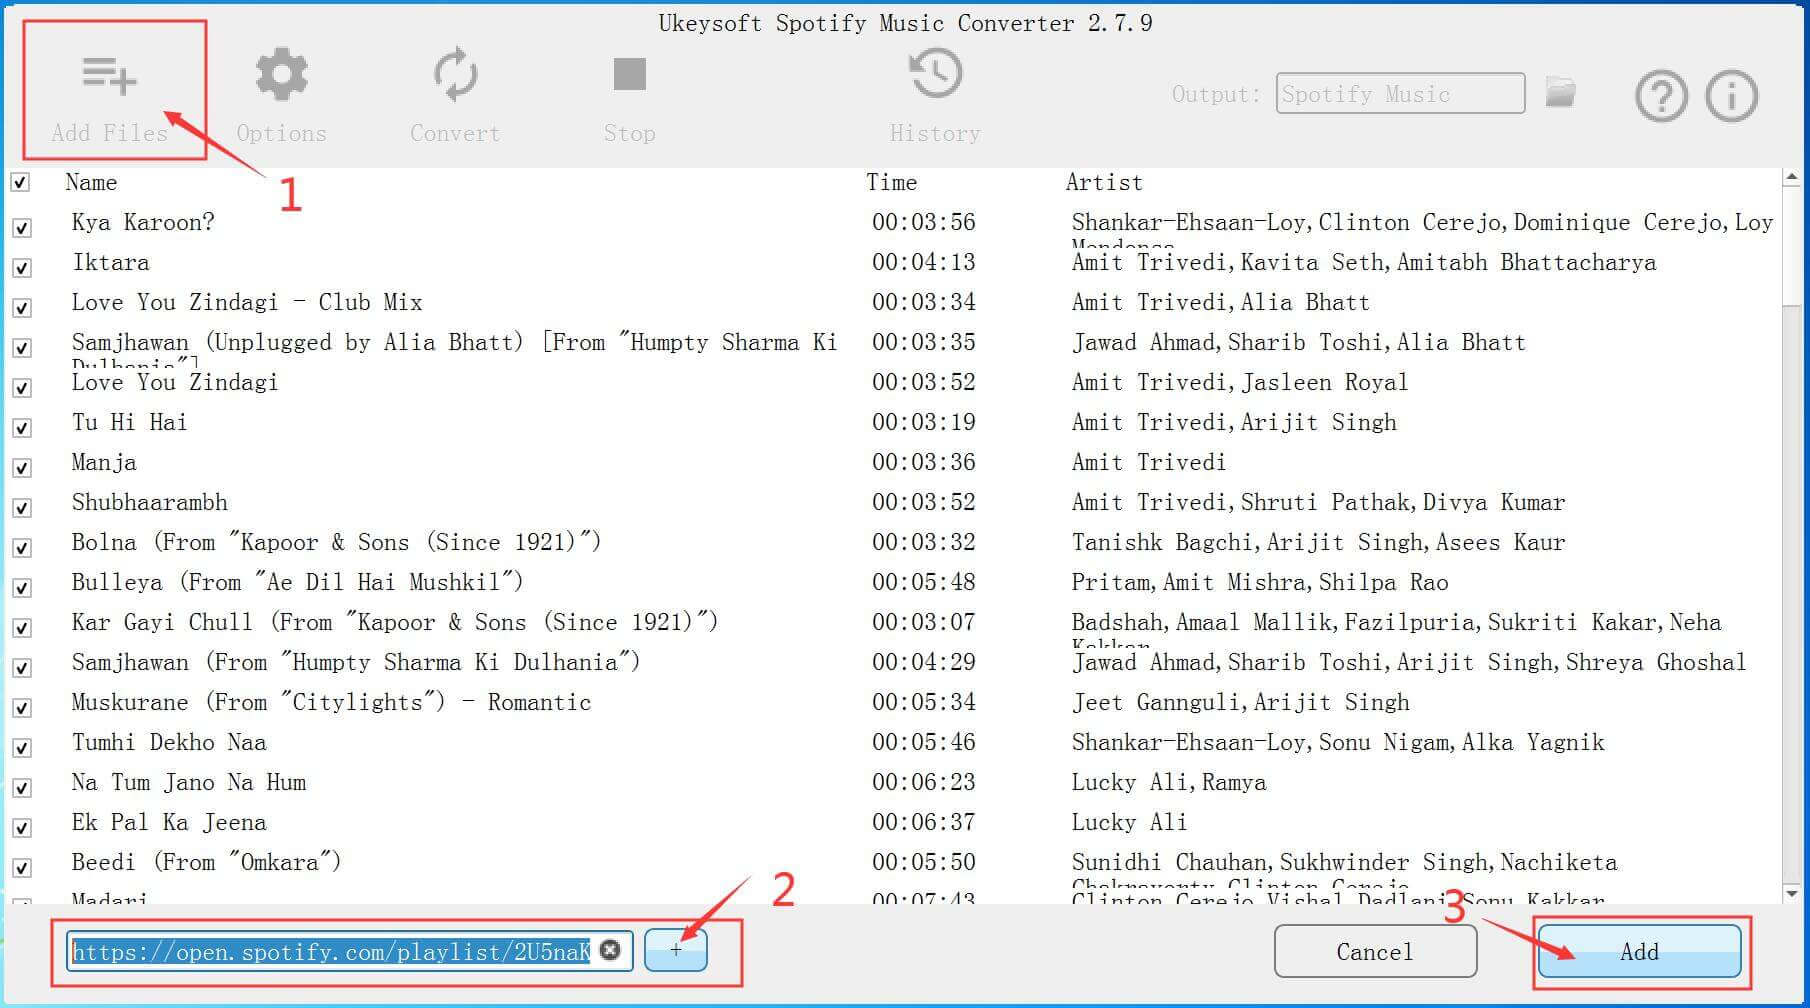 add hindi's songs and playlist to converter